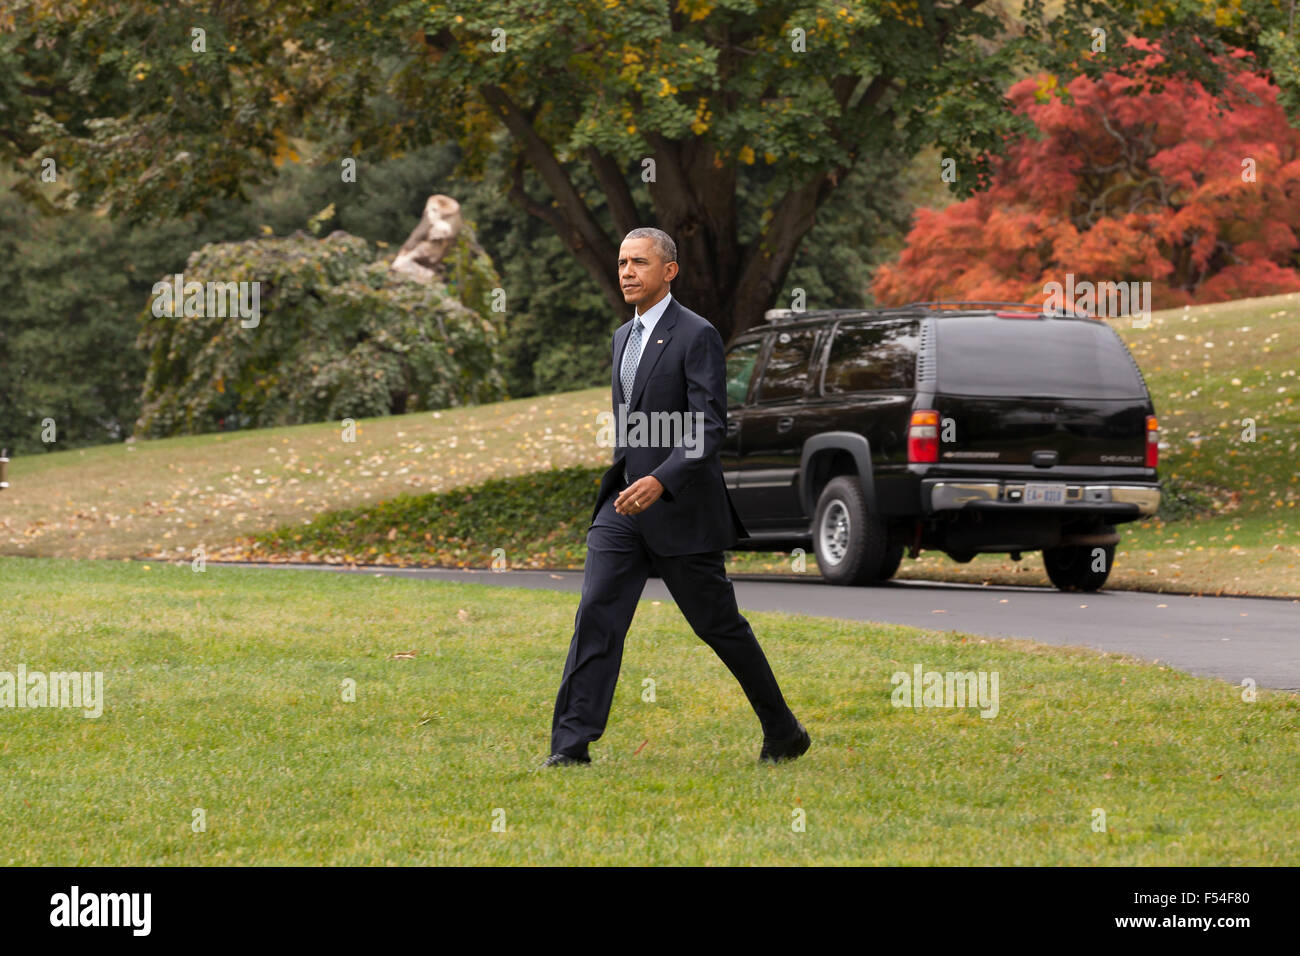 Washington, DC, USA. 27th October, 2015. President Obama boarding Marine One helicopter  on the South Lawn of the White House.  The President is traveling to Chicago, Illinois to address the world's law enforcement leaders at the International Association of Chiefs of Police (IACP) Conference and Exposition. Credit:  B Christopher/Alamy Live News Stock Photo